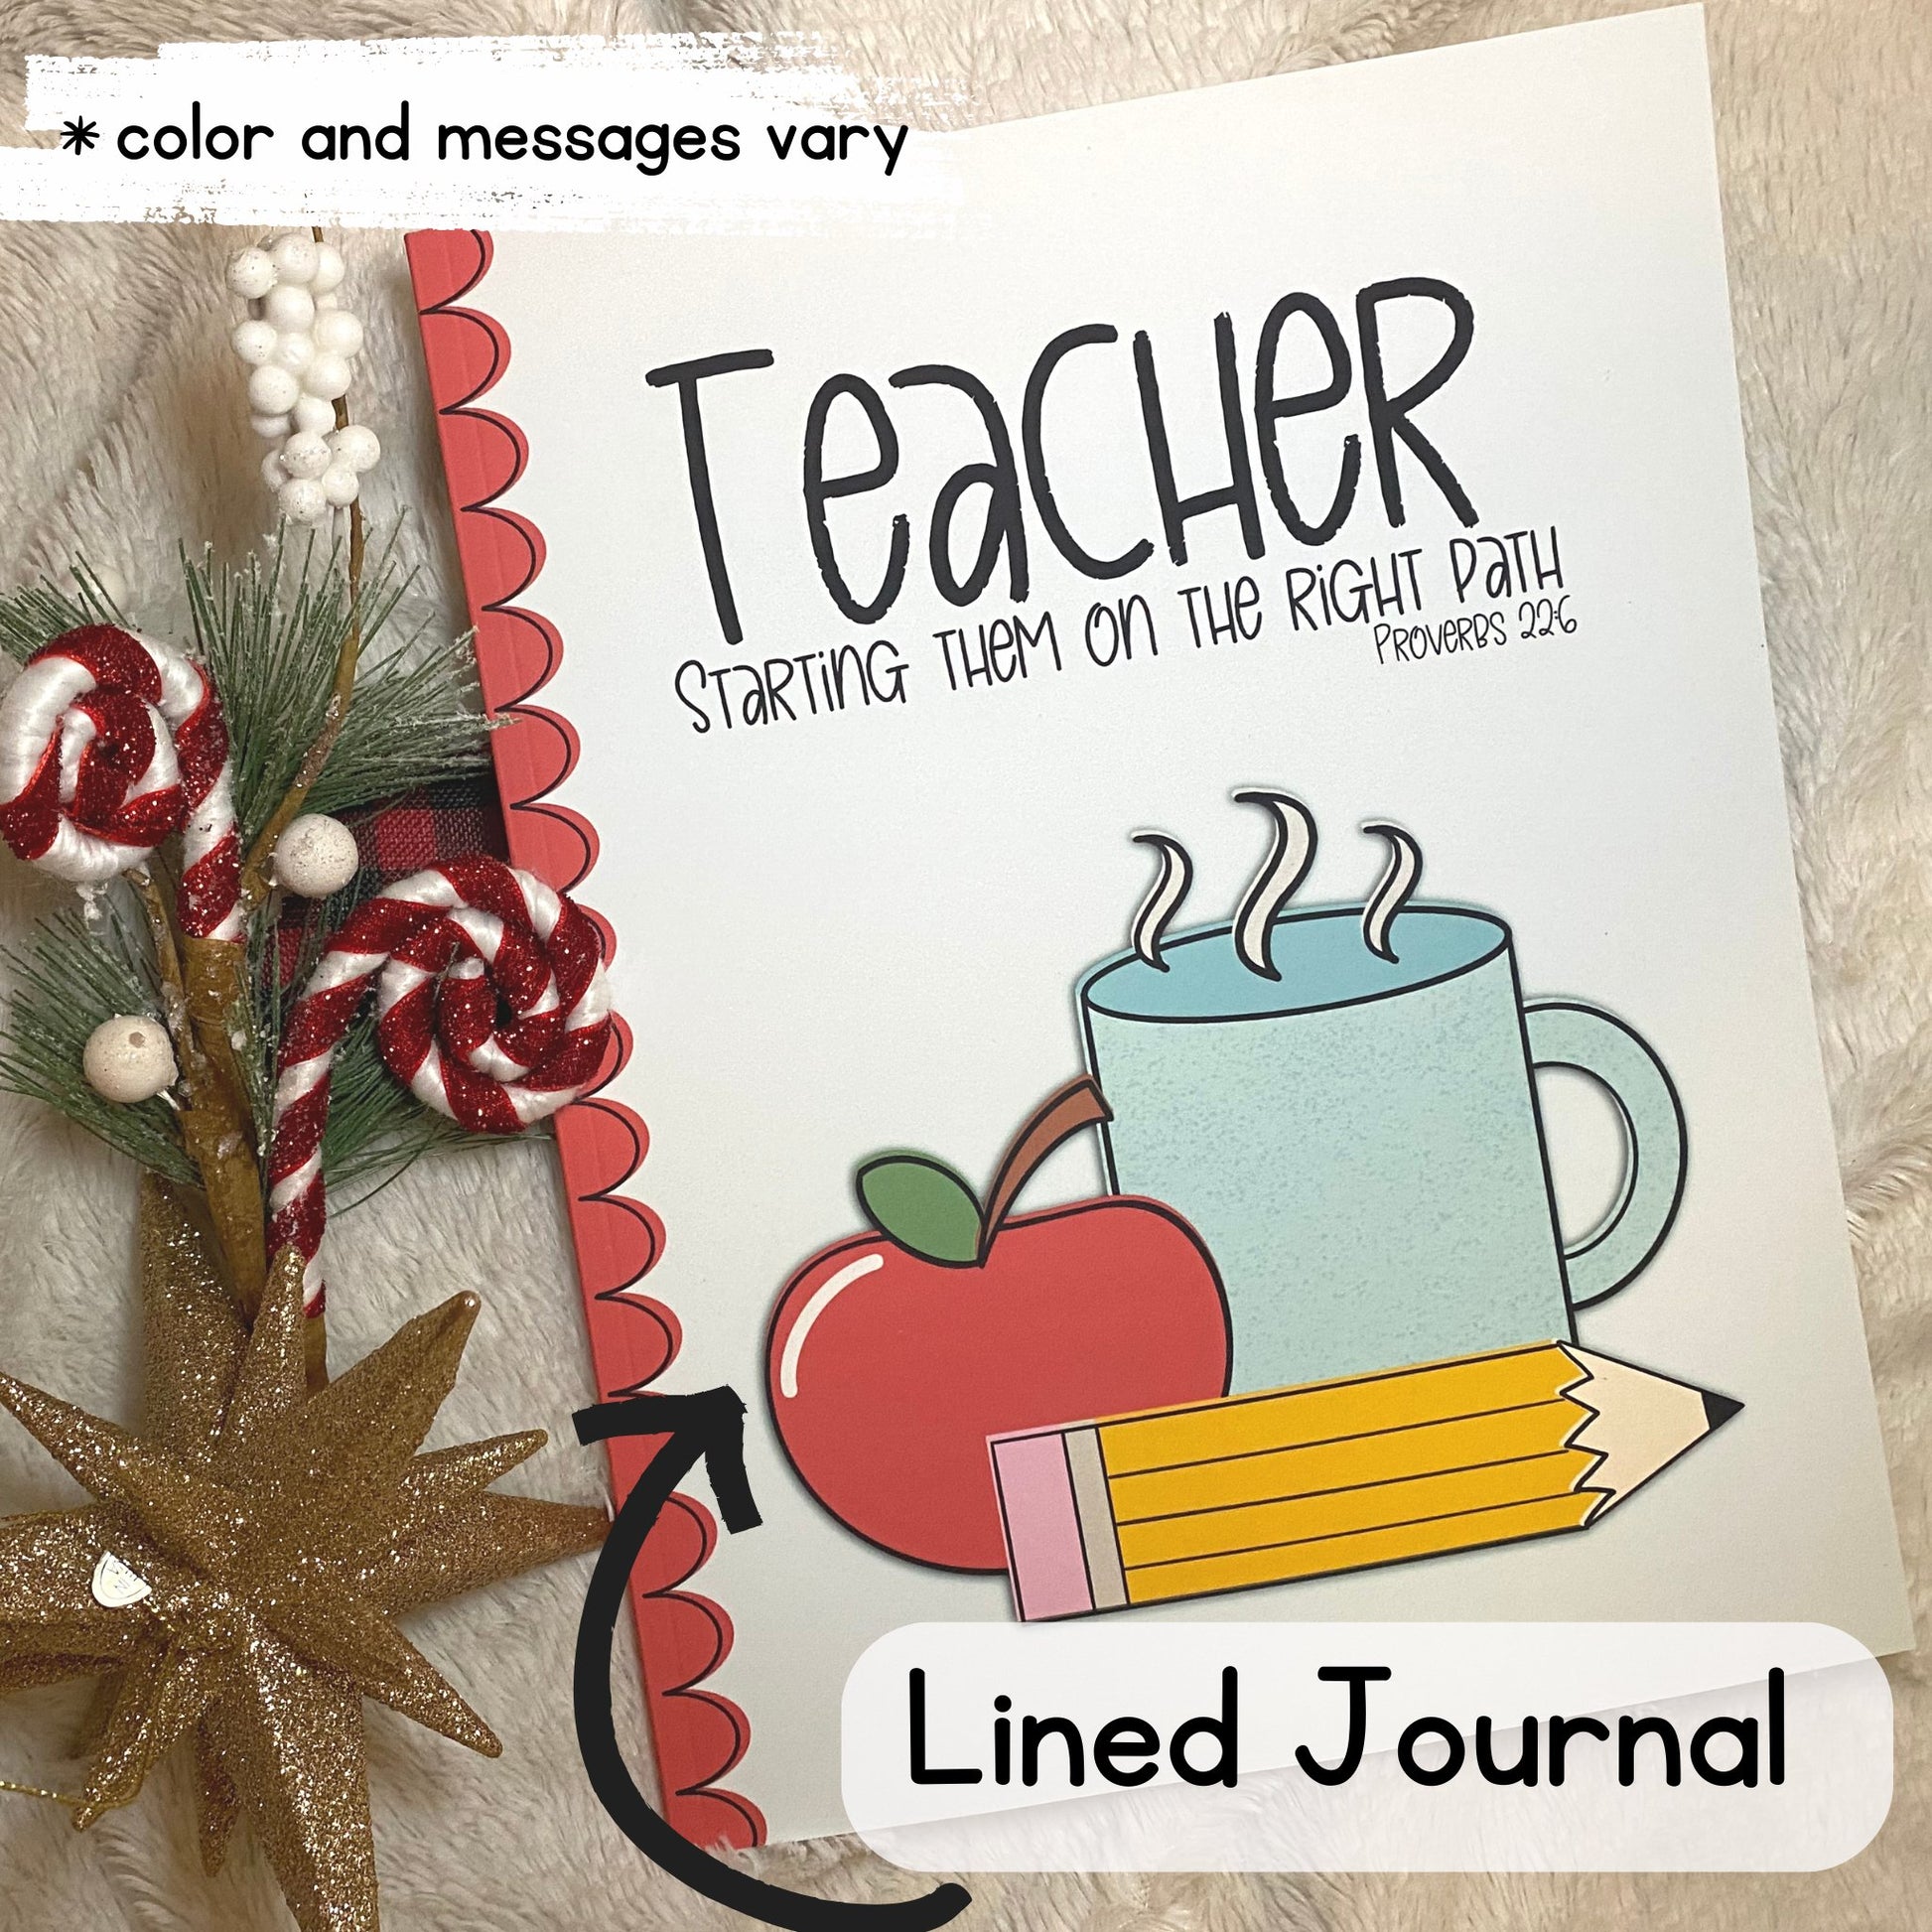 Front image of one of the lined journal included in the teacher gift set self published through Amazon KDP and Kindle Direct Publishing that includes a personalized copy of "You're More Than My Teacher."